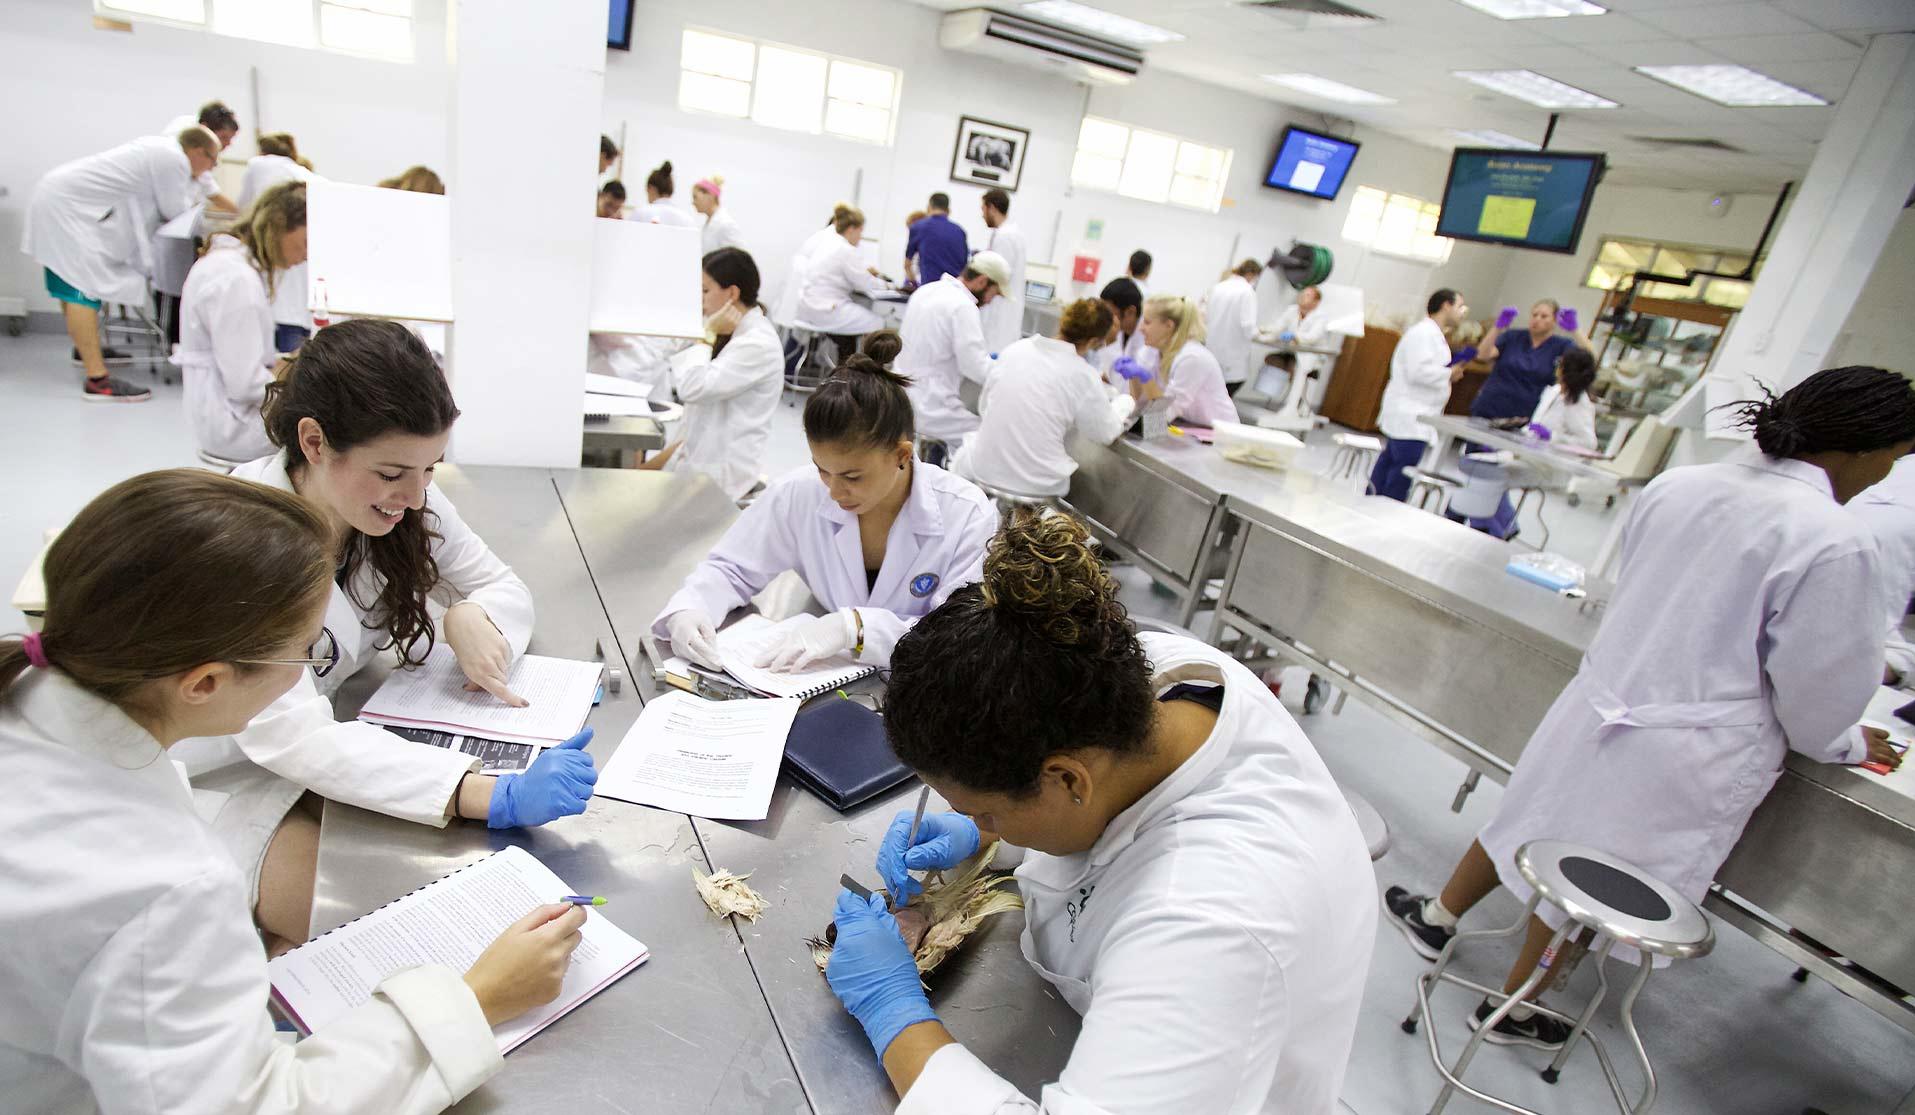 Ross Vet students in a laboratory classroom working on a project